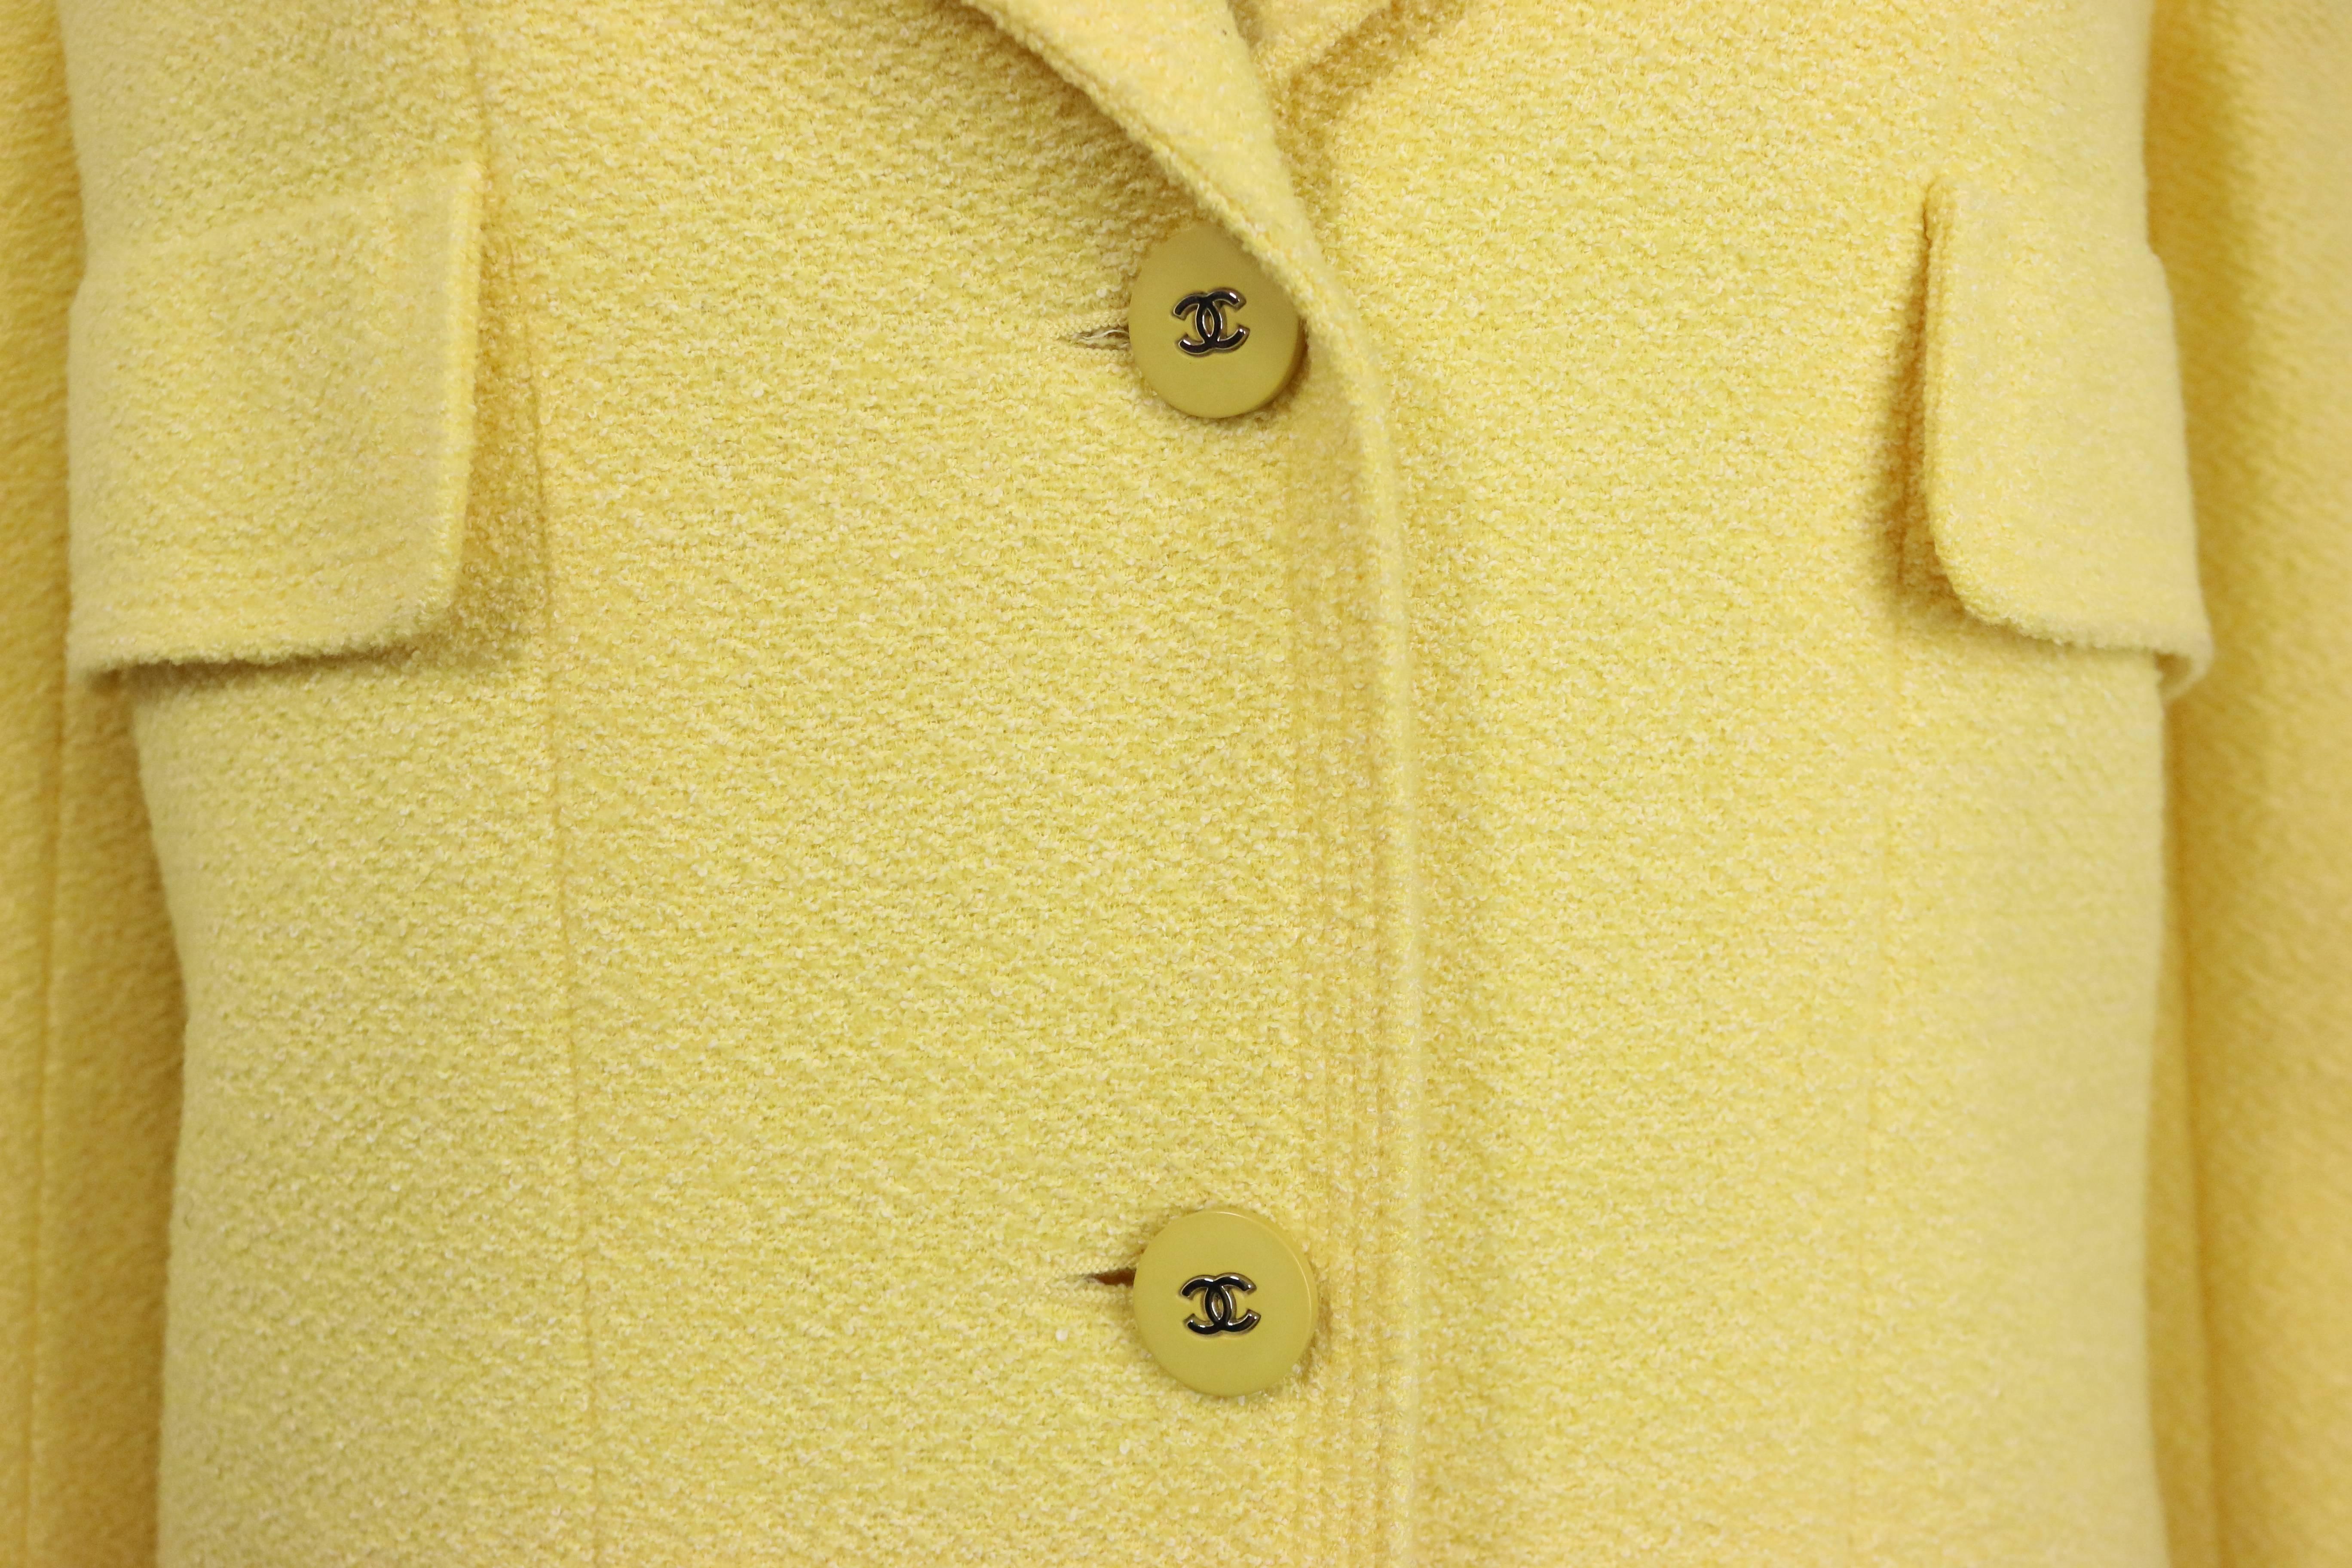 - Vintage Chanel yellow boucle wool jacket from 1998c collection. Featuring a four front flap pockets, two yellow 